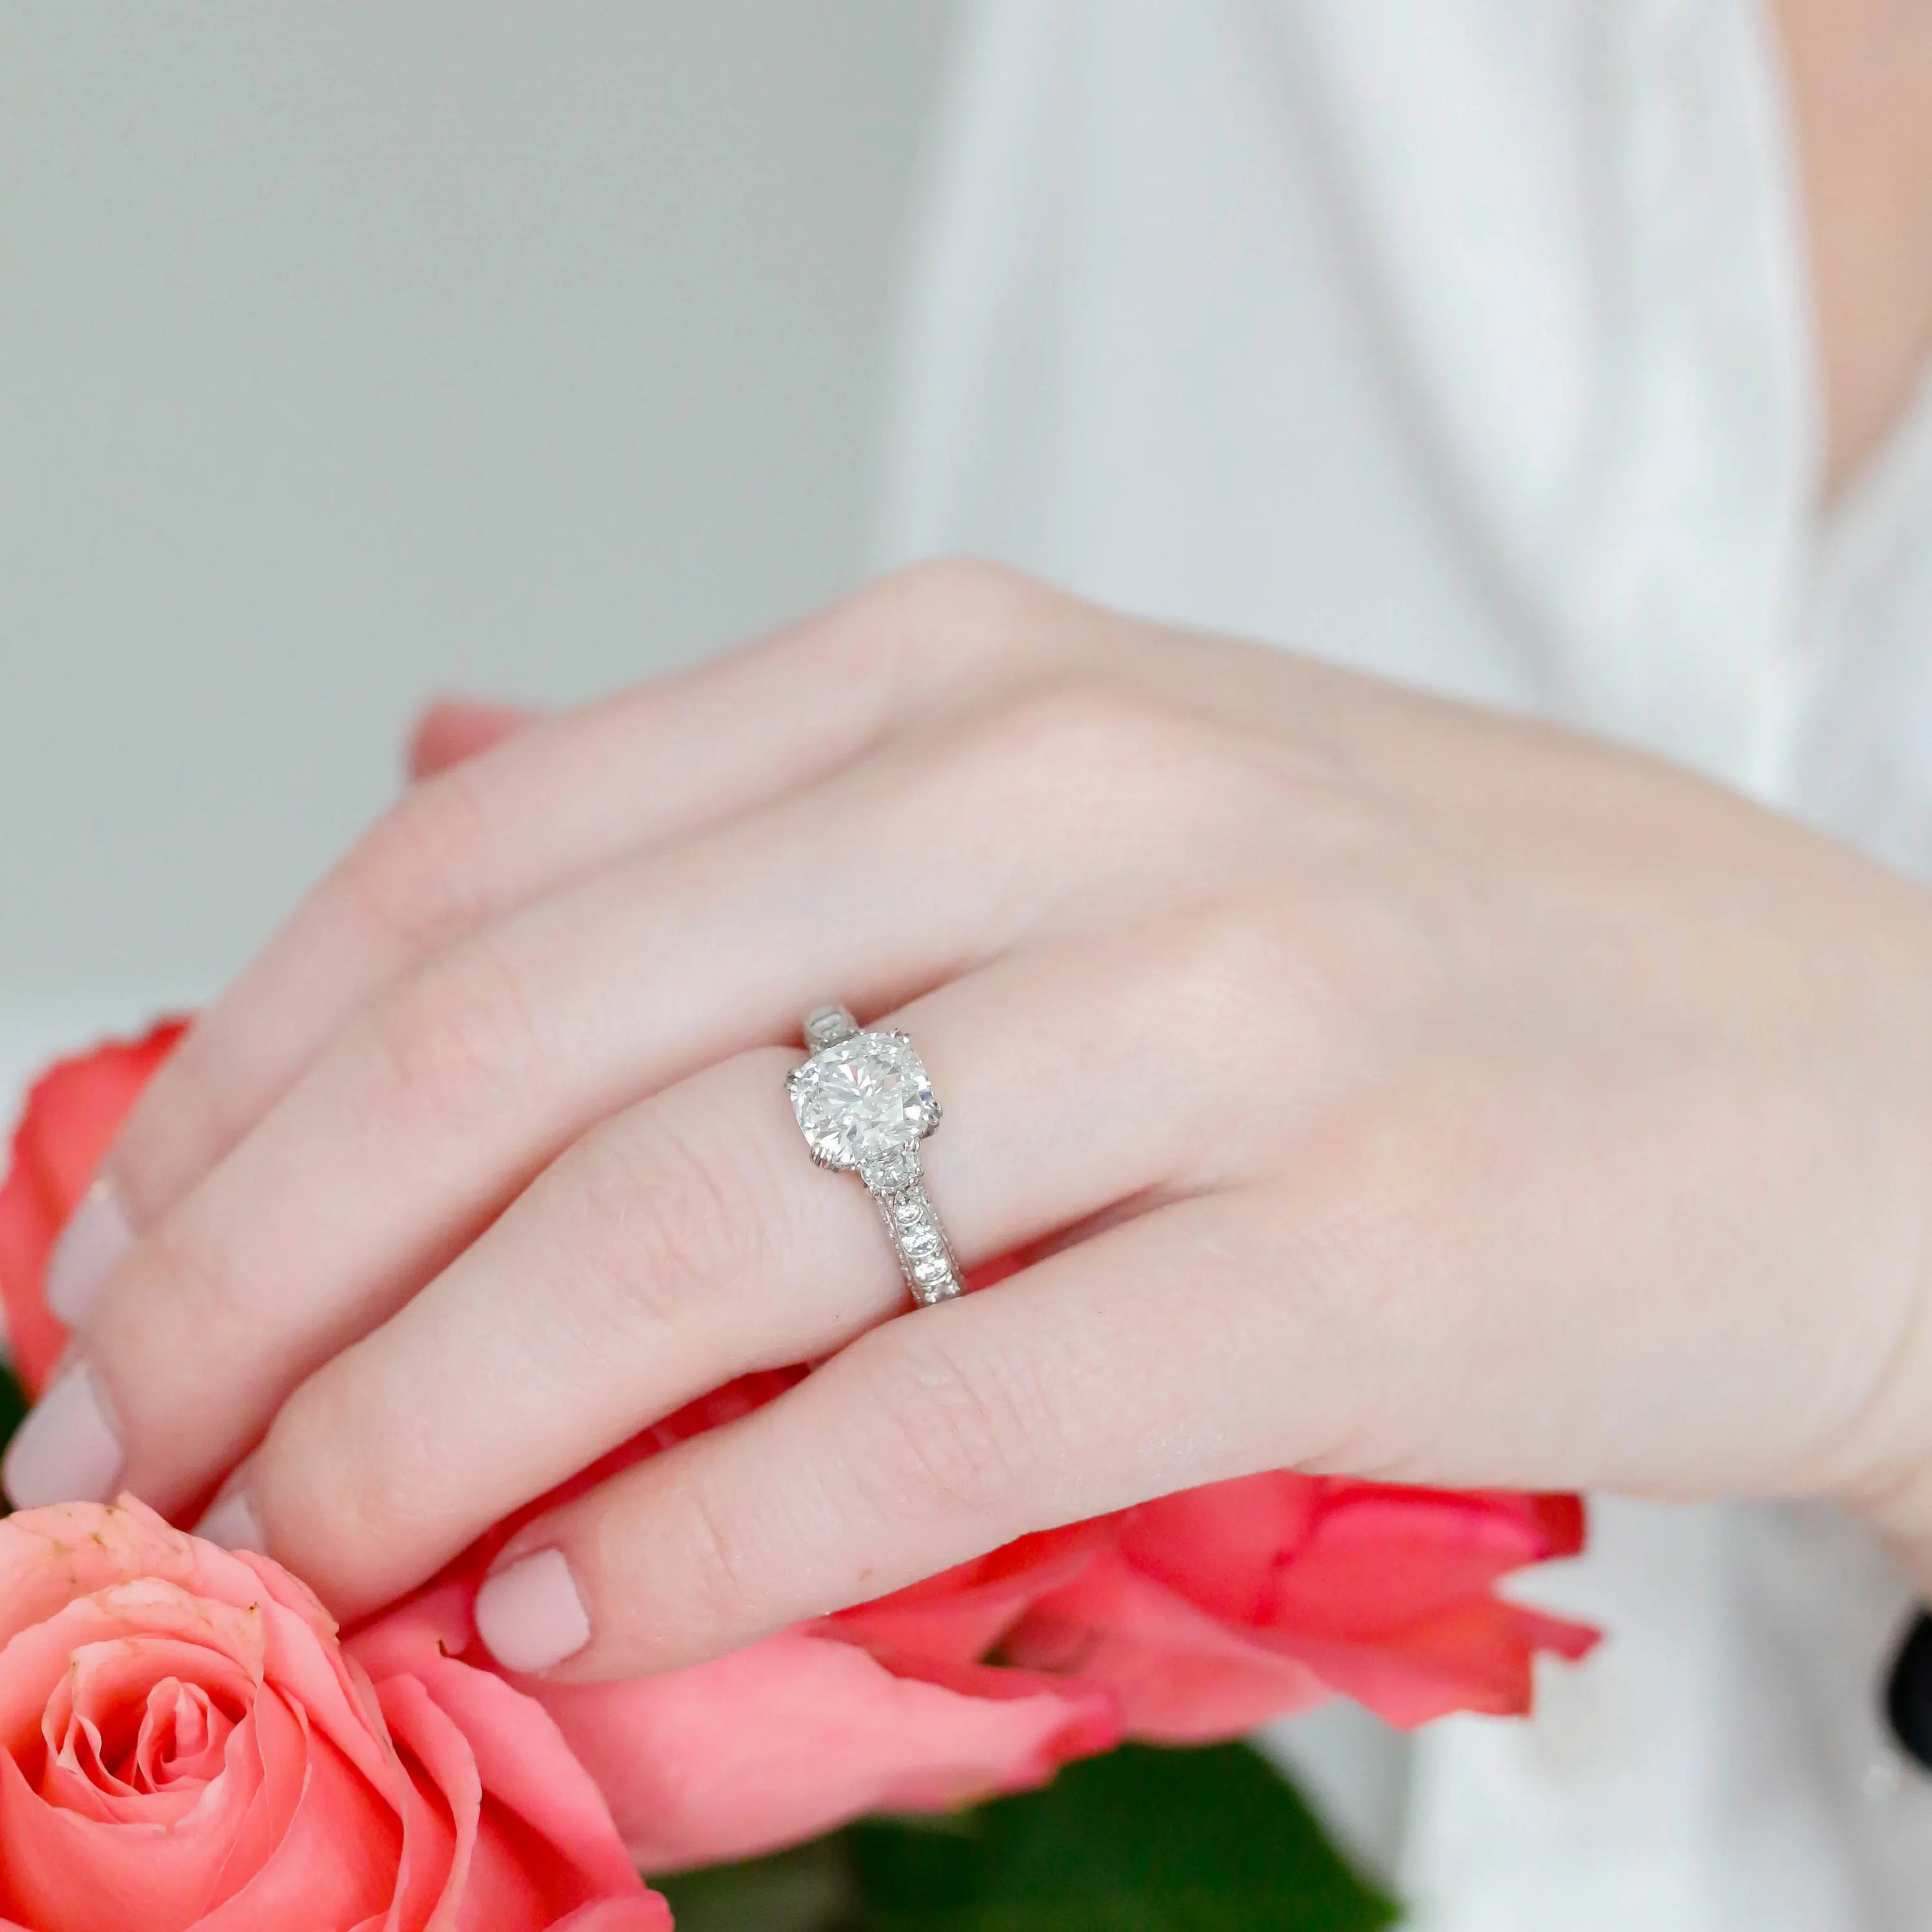 Princess Cut vs. Cushion Cut: What is the Difference?